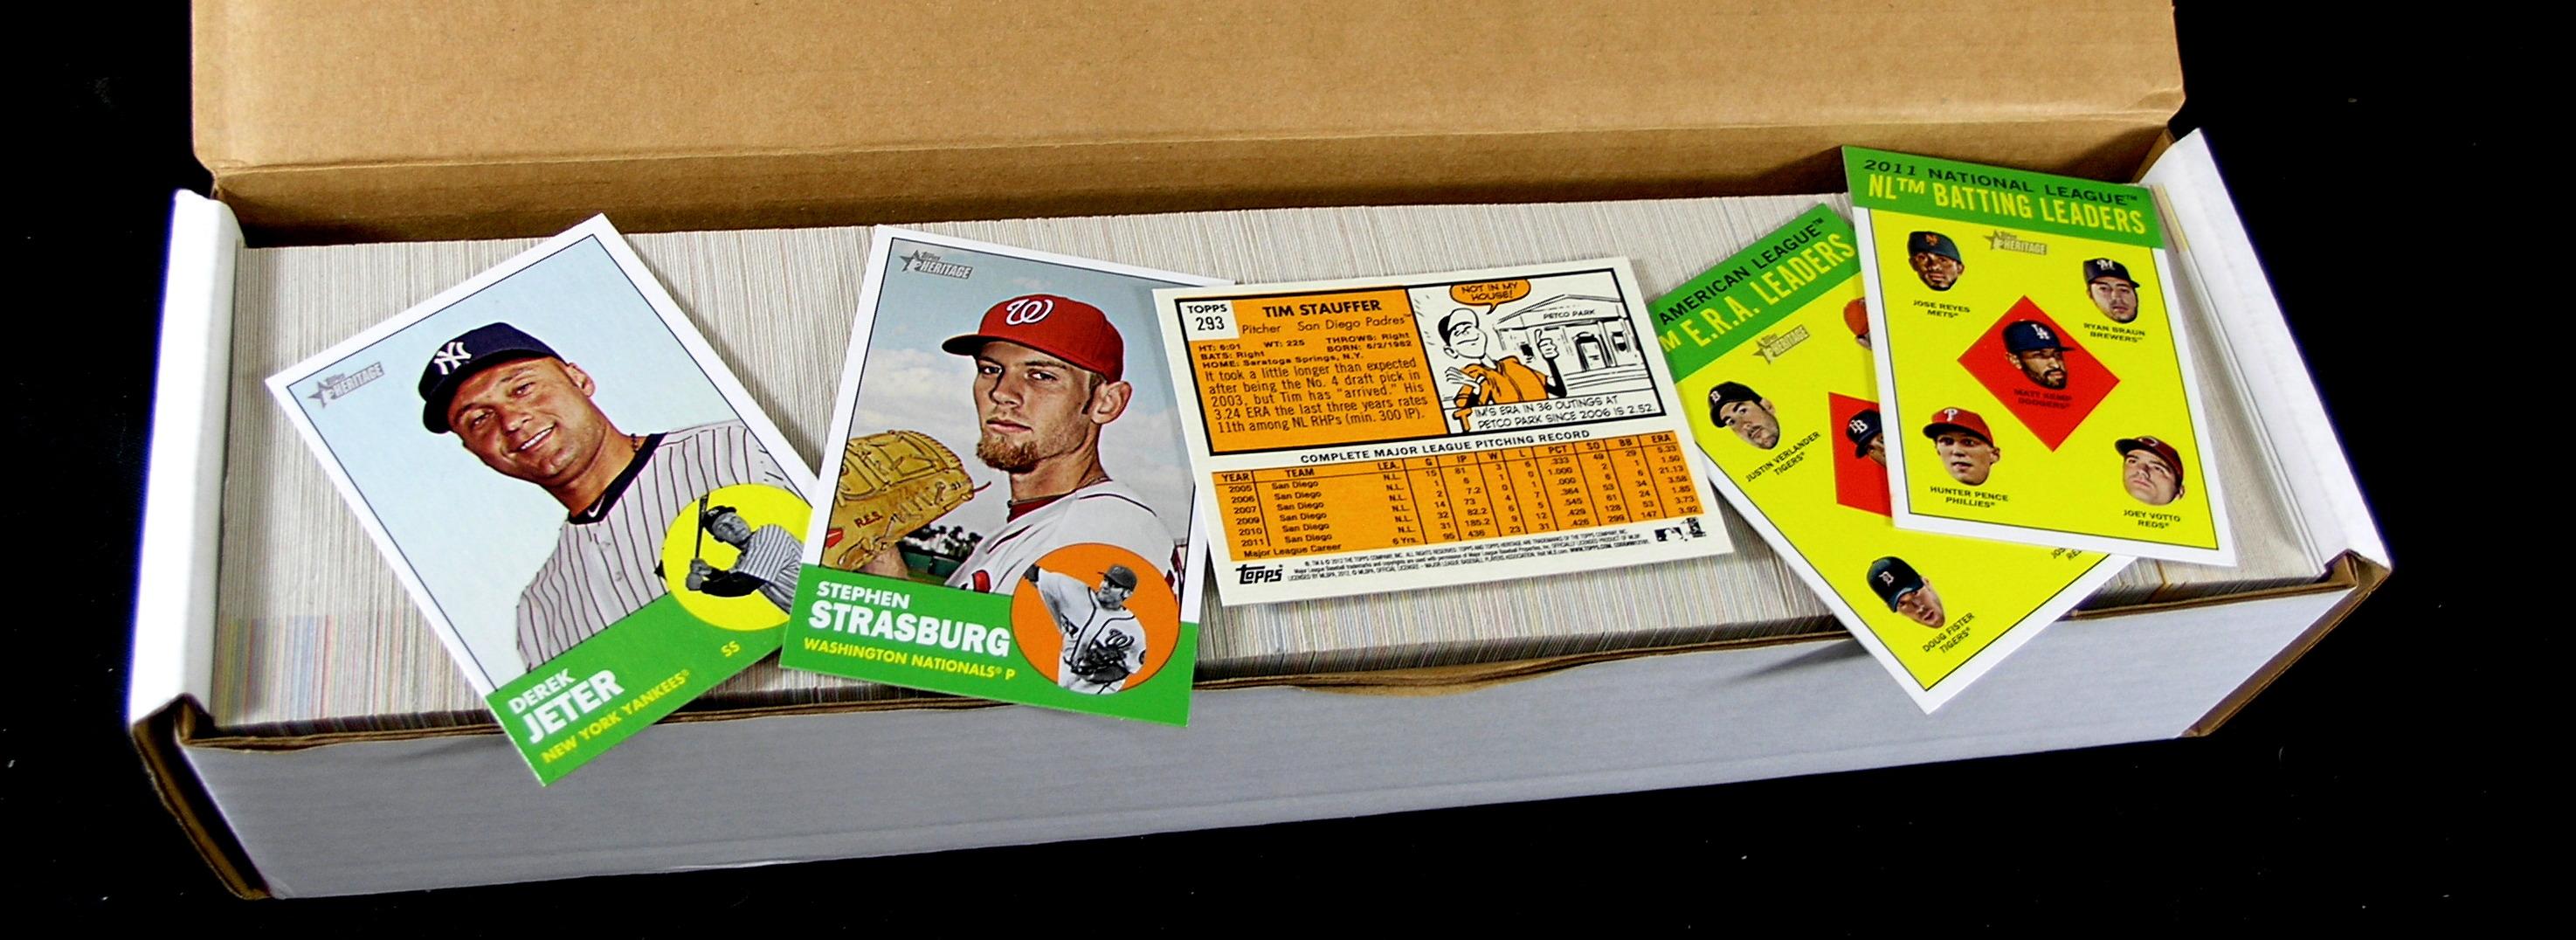 2012 Topps Heritage Baseball "Master Set" Featuring the Baseball Players of